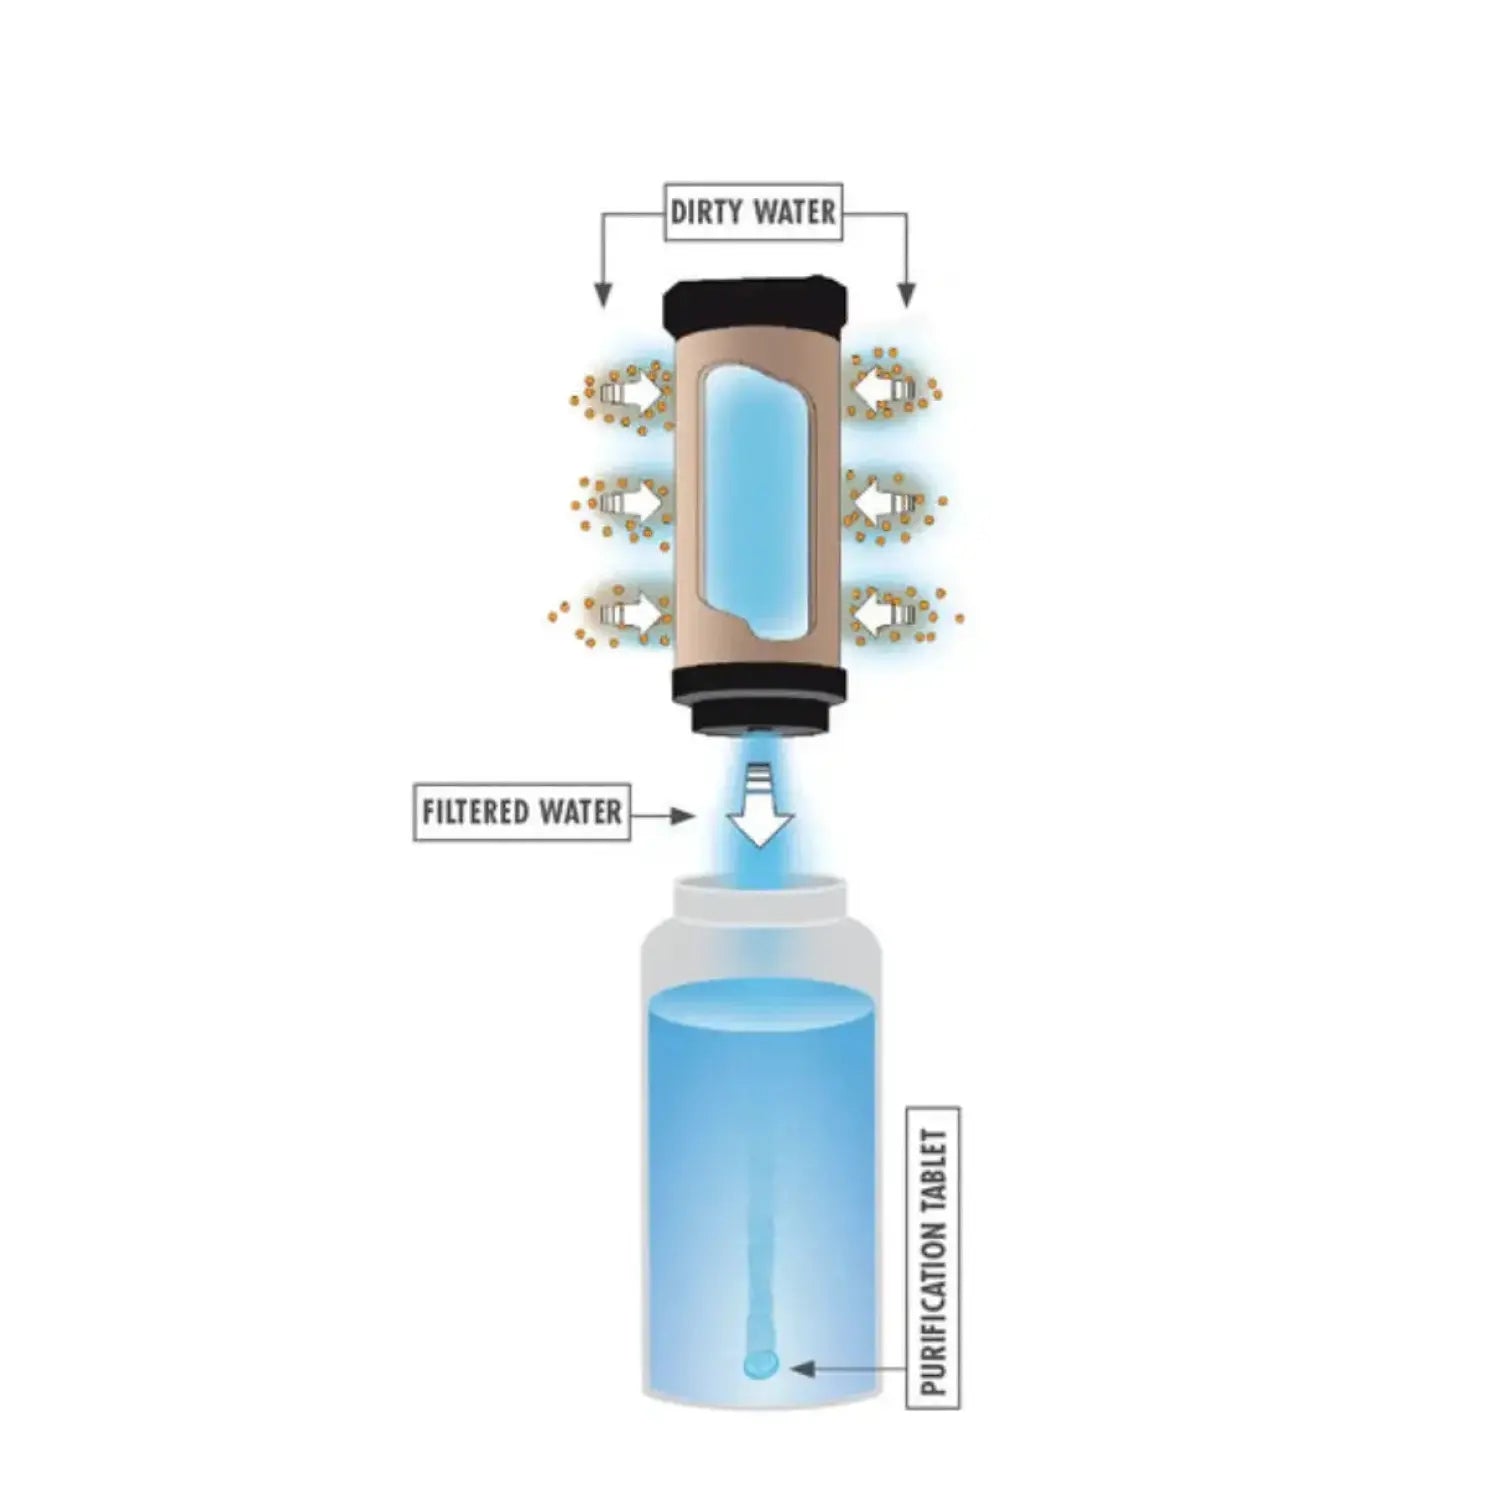 Diagram of how MiniWorks EX Purifier System filters dirty water into clean purified water. 